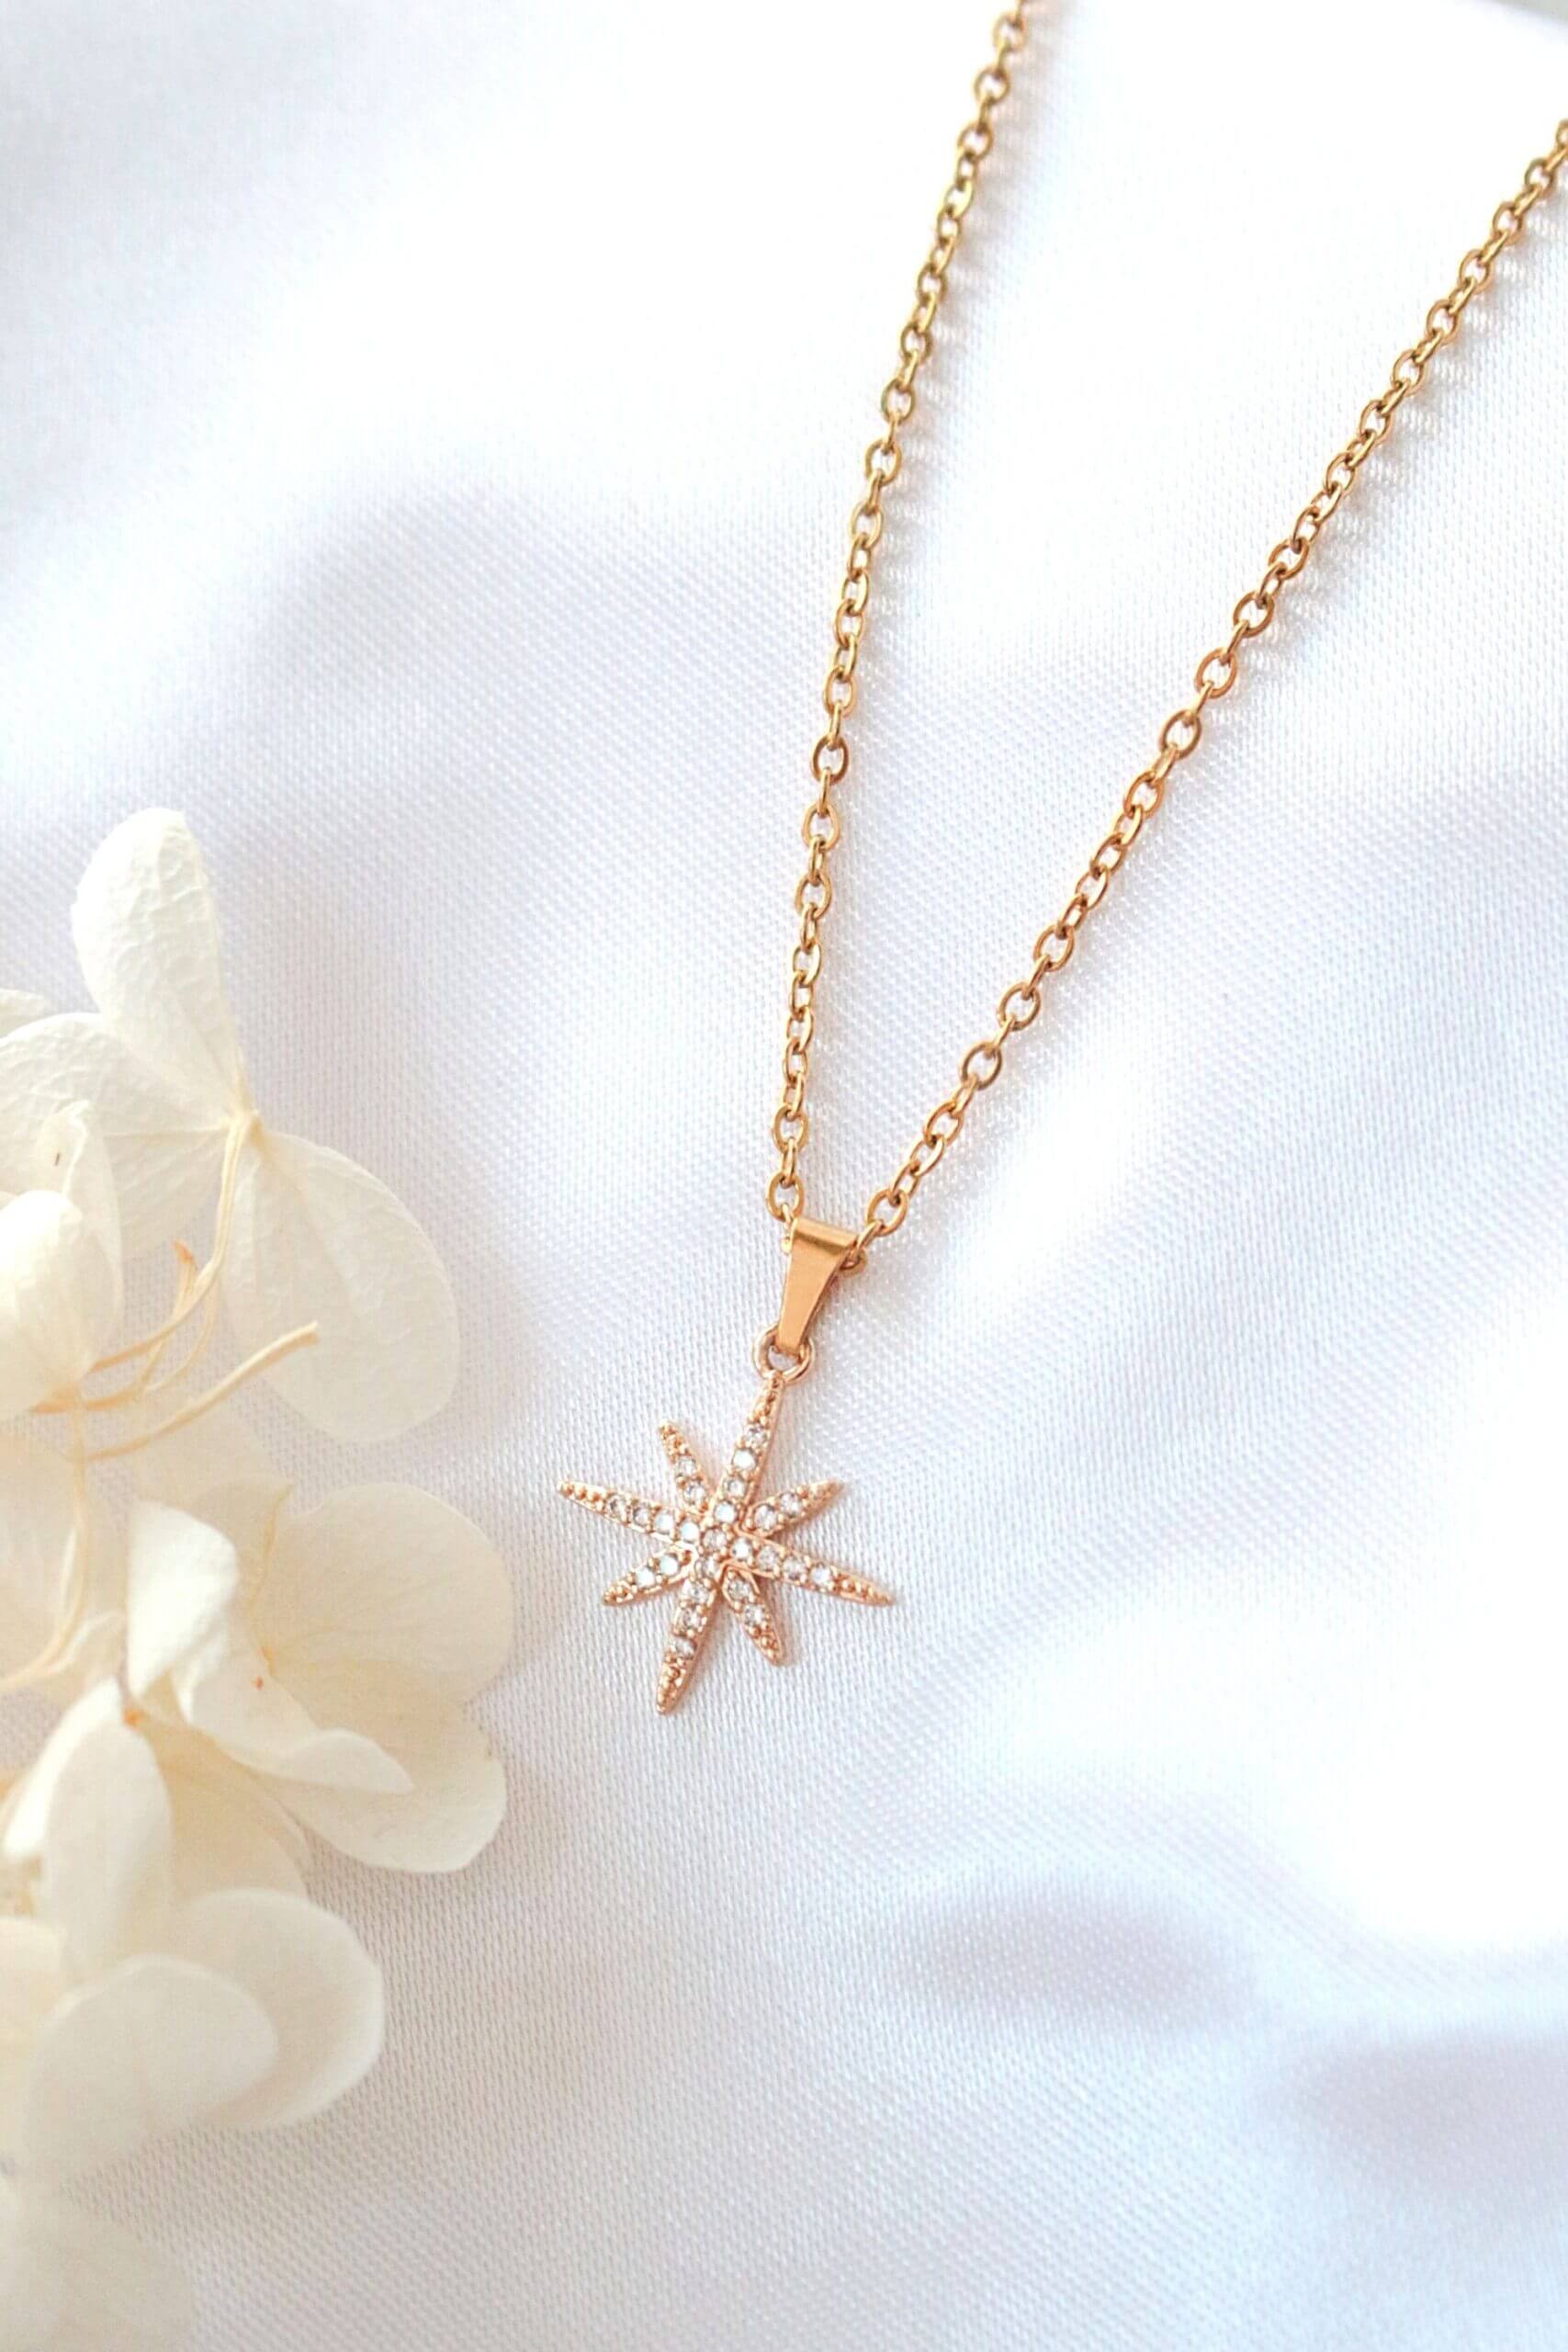 24K Gold Plated Polaris Star Necklace with Cubic Zirconia - Hypoallergenic and Handmade in Europe Bijou Her